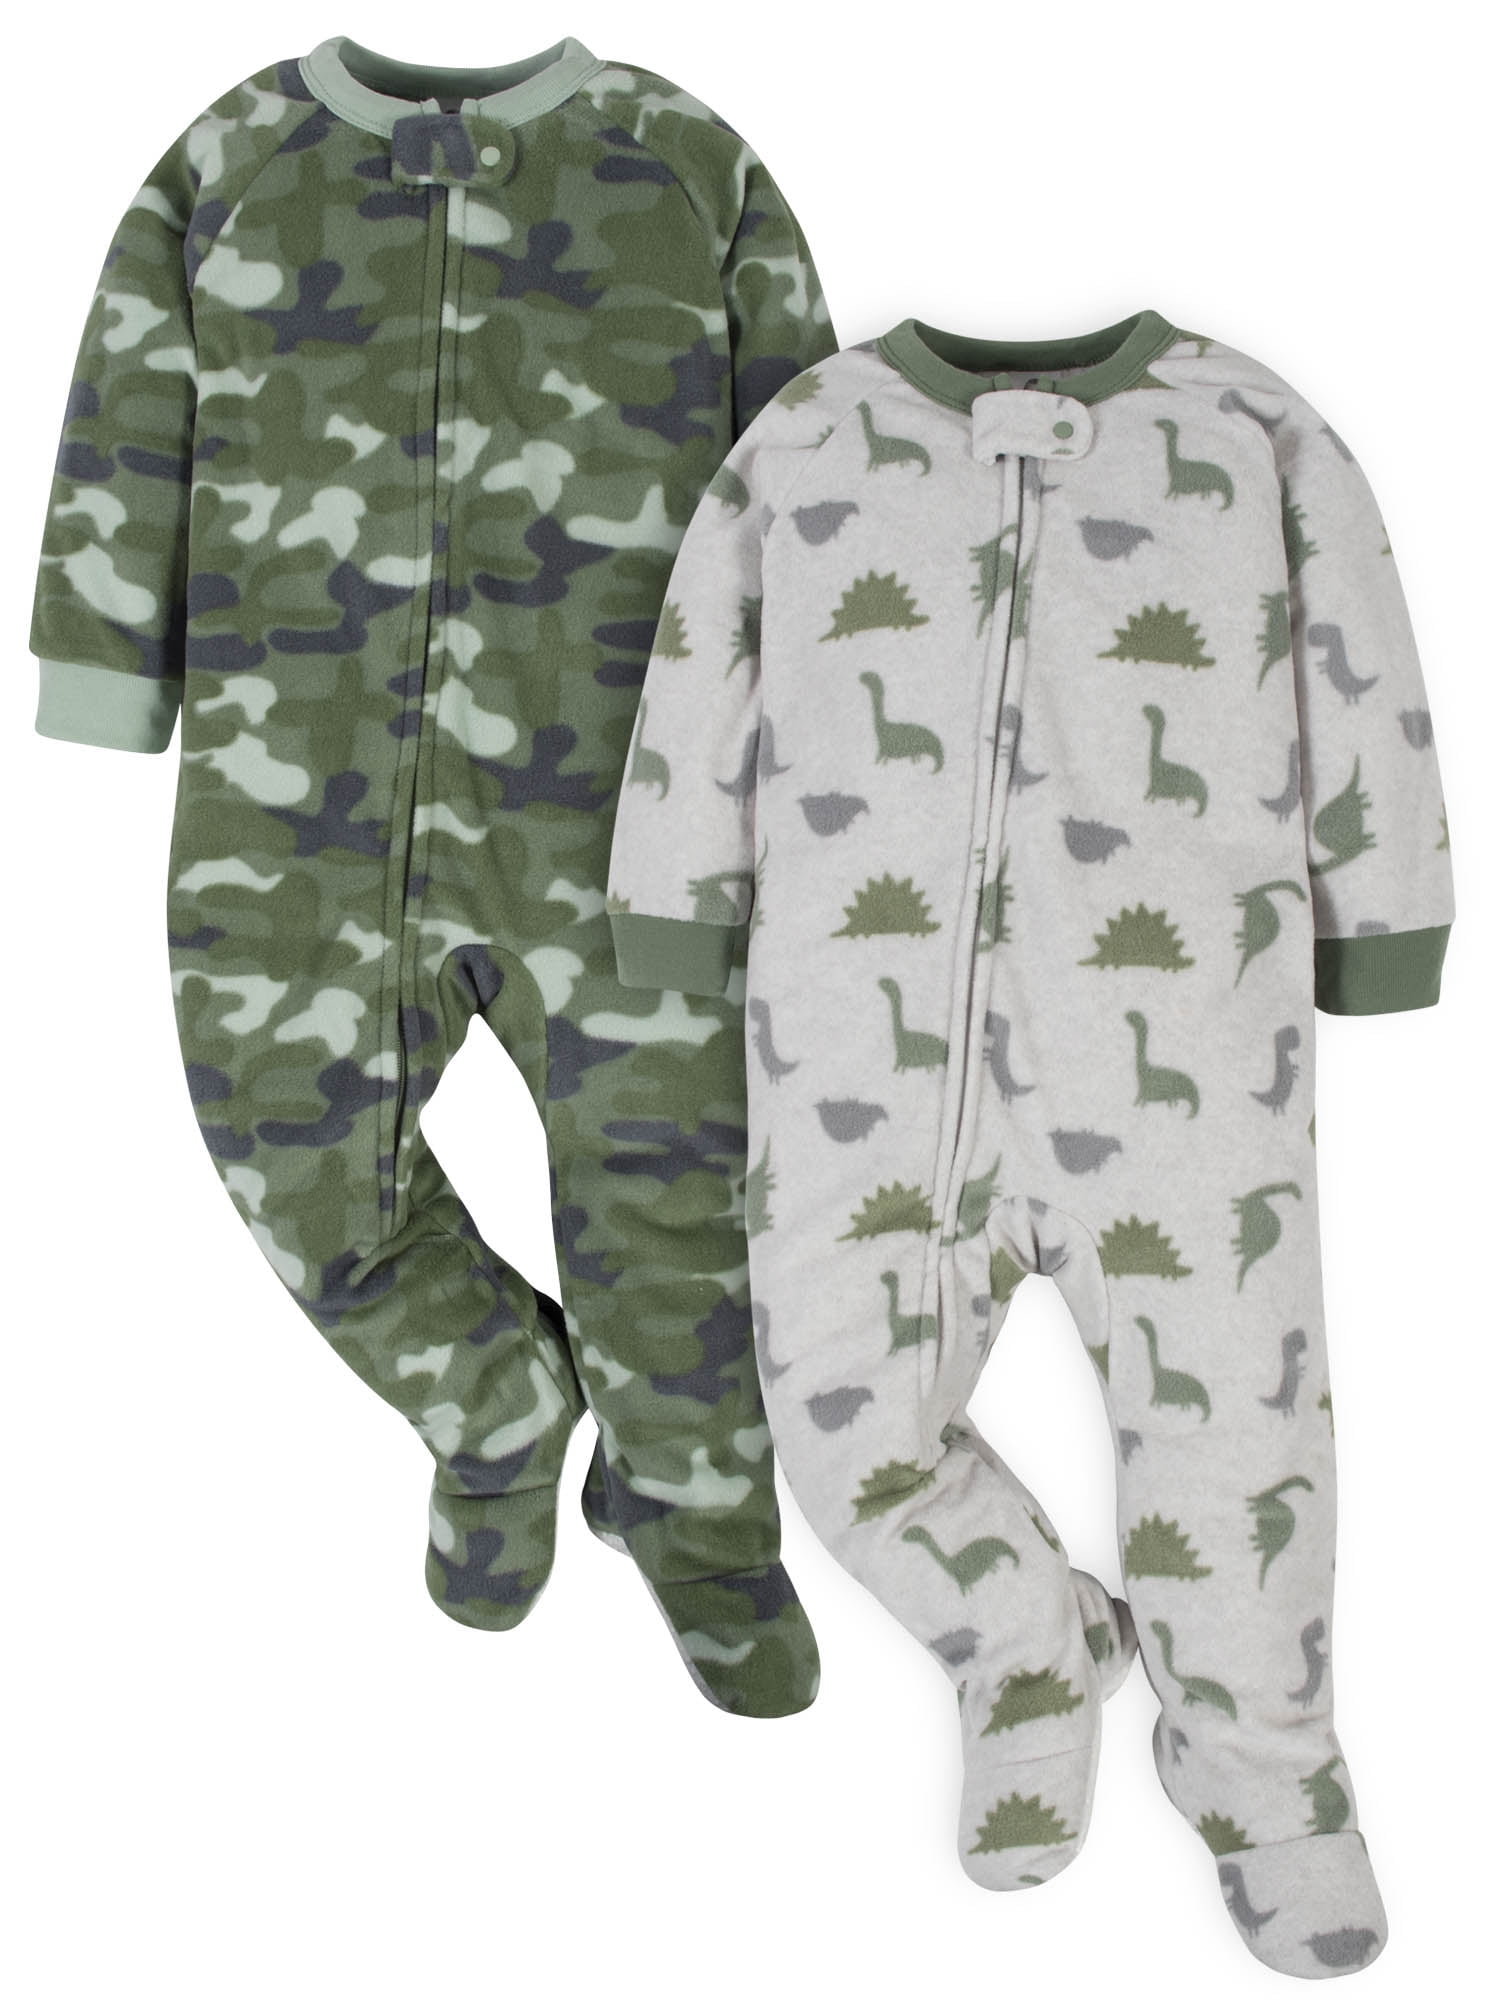 Boys All In One Sleepsuit Soft Microfleece Skull Camouflage Print SALE PRICE 